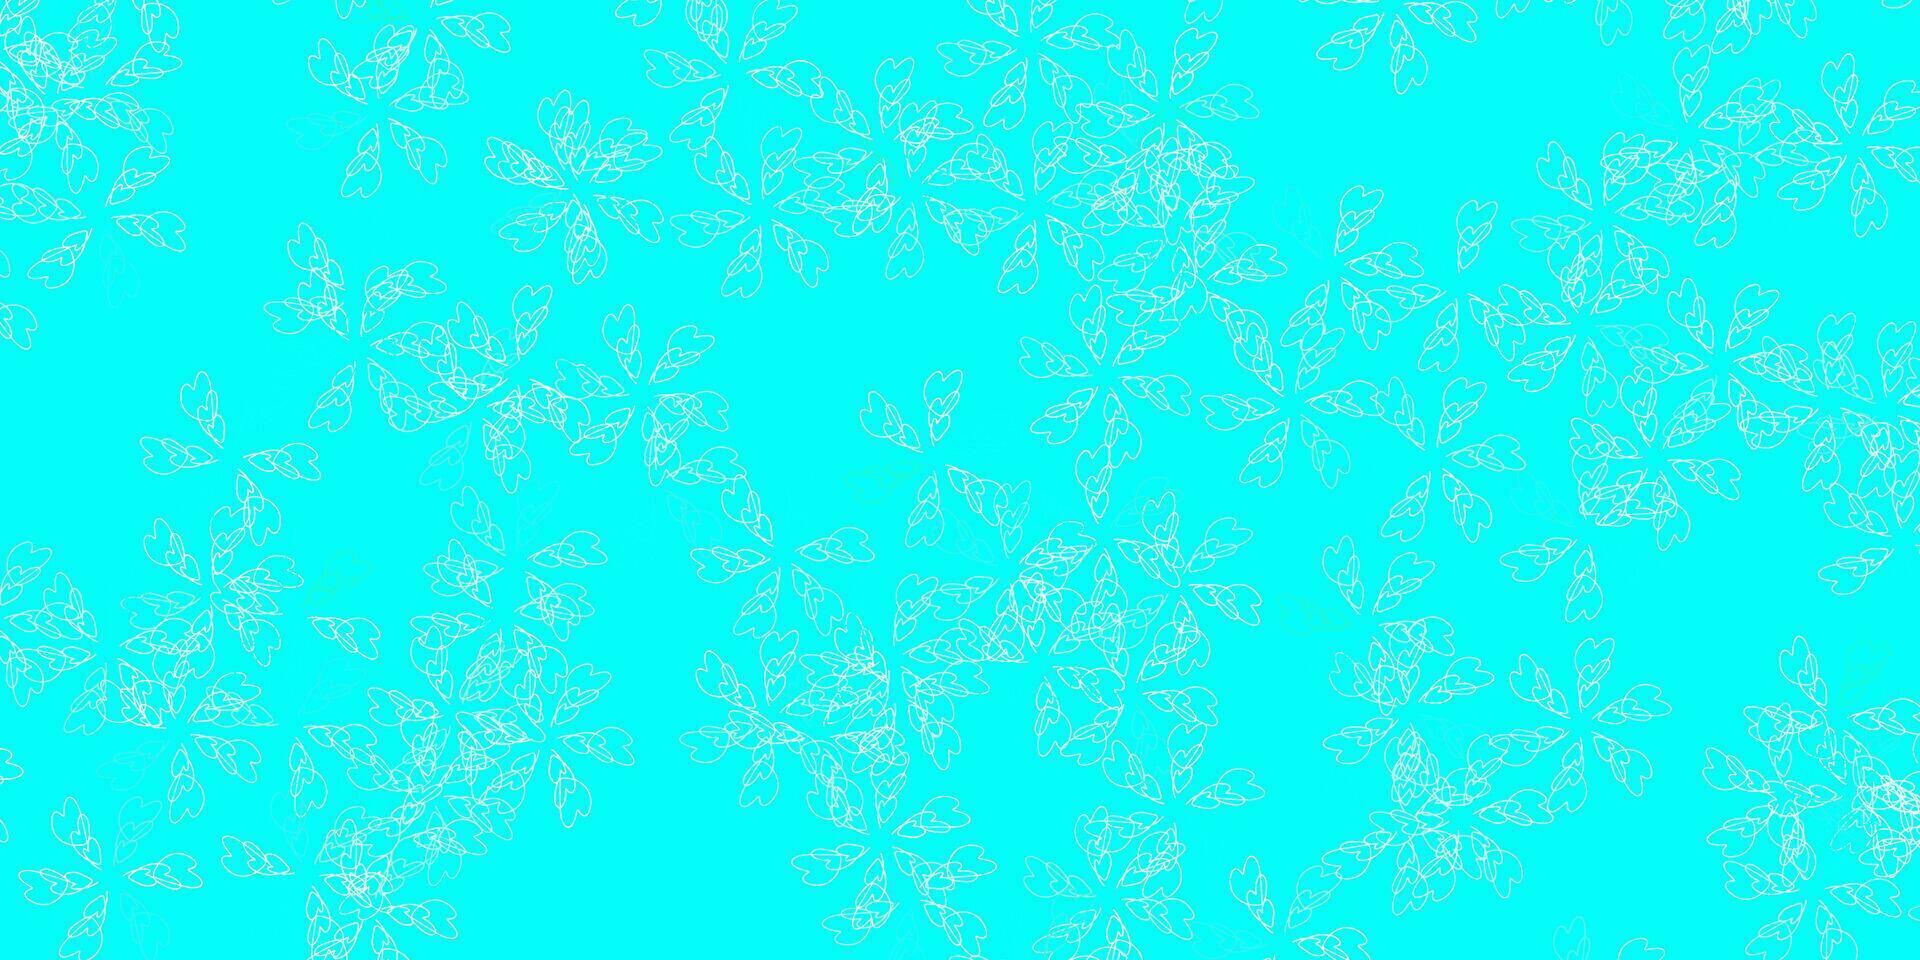 Light blue, green vector abstract pattern with leaves.